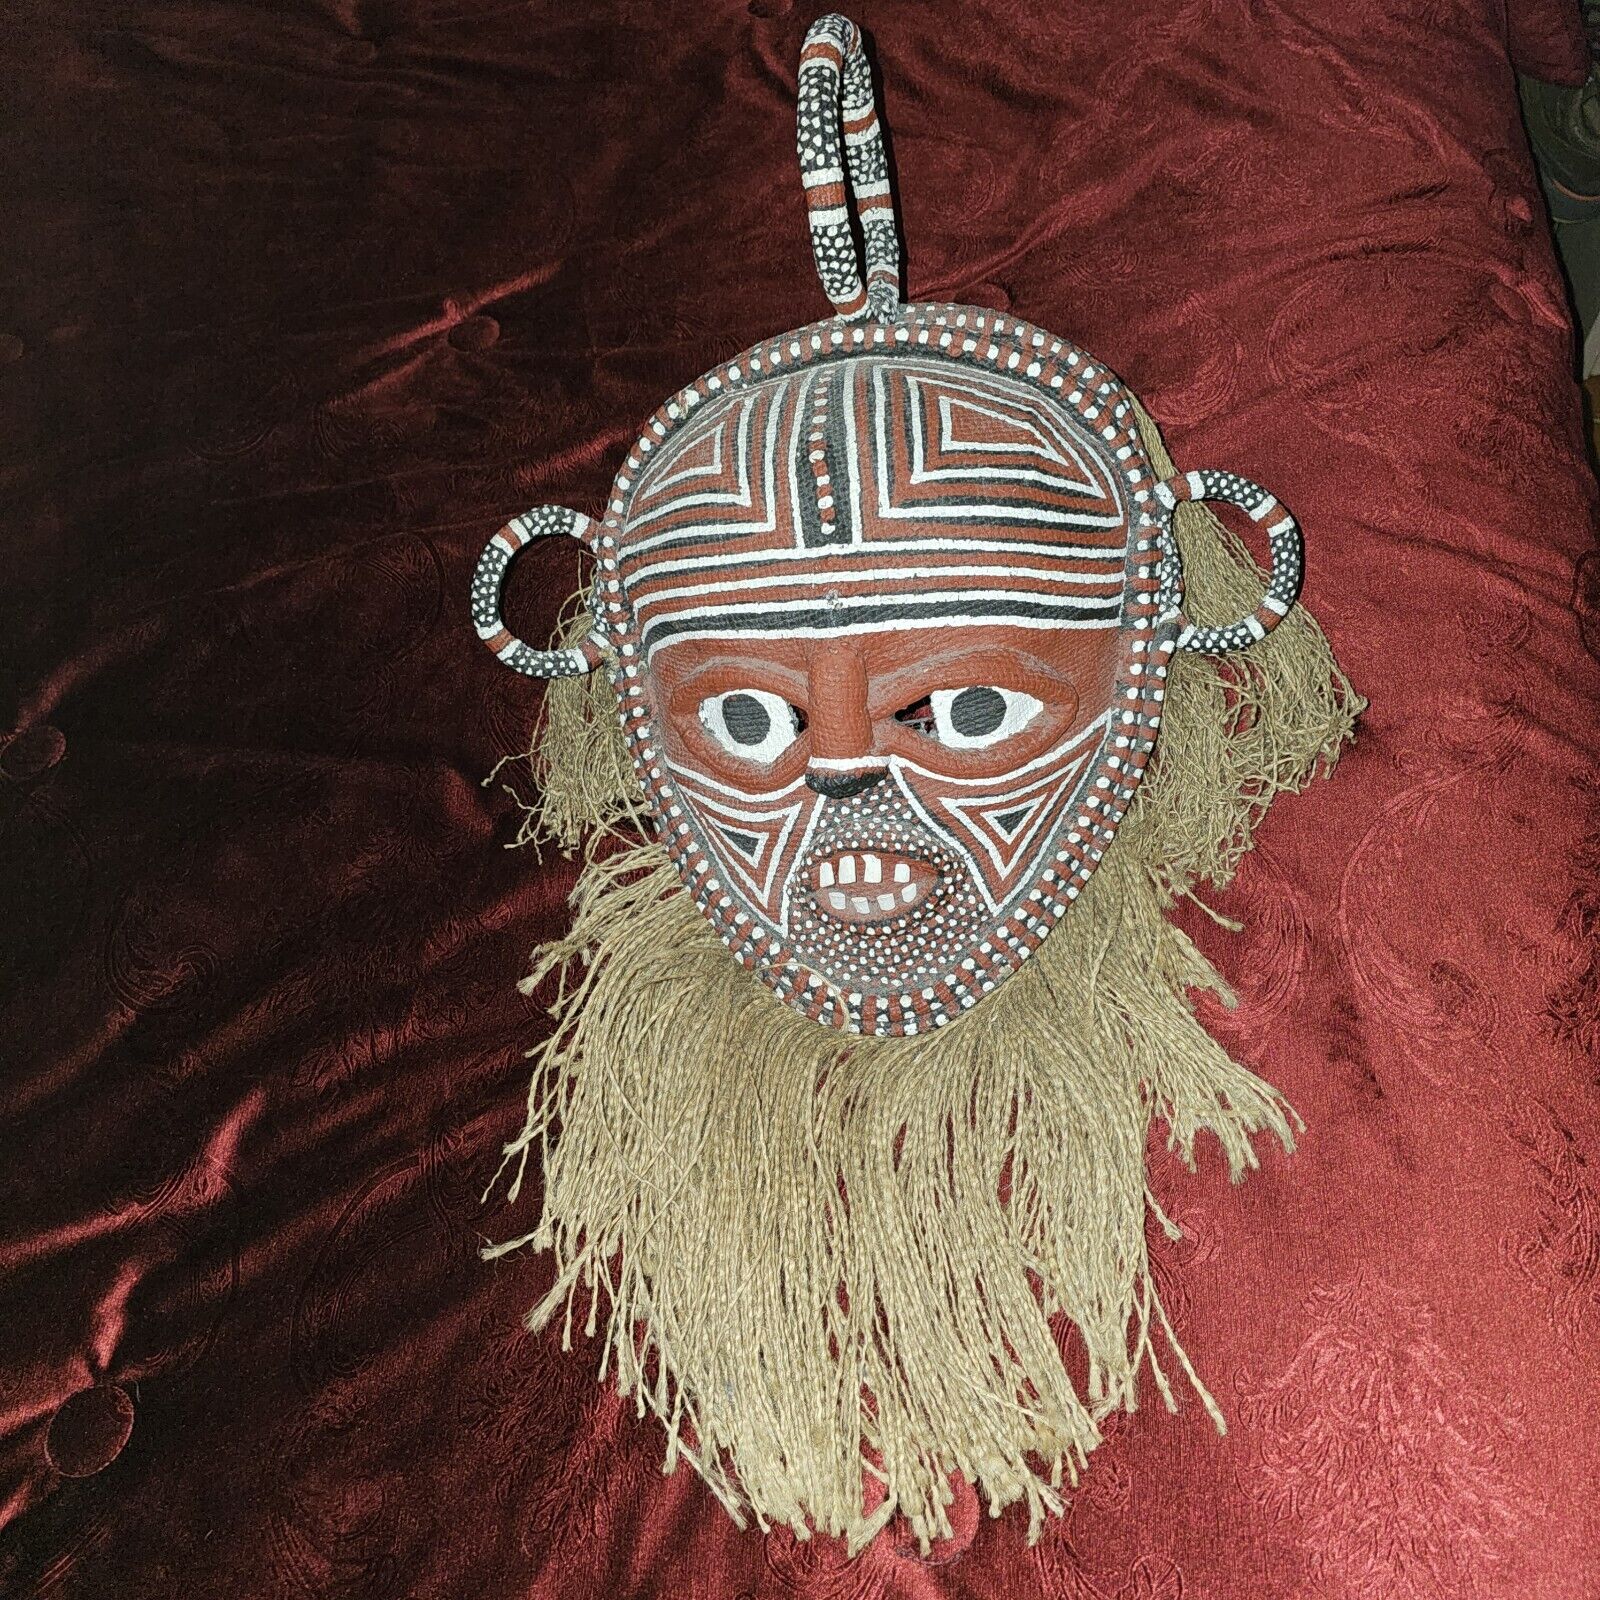 Authentic African Ceremonial Mask Handmade And Hand Painted Striking Tribal...